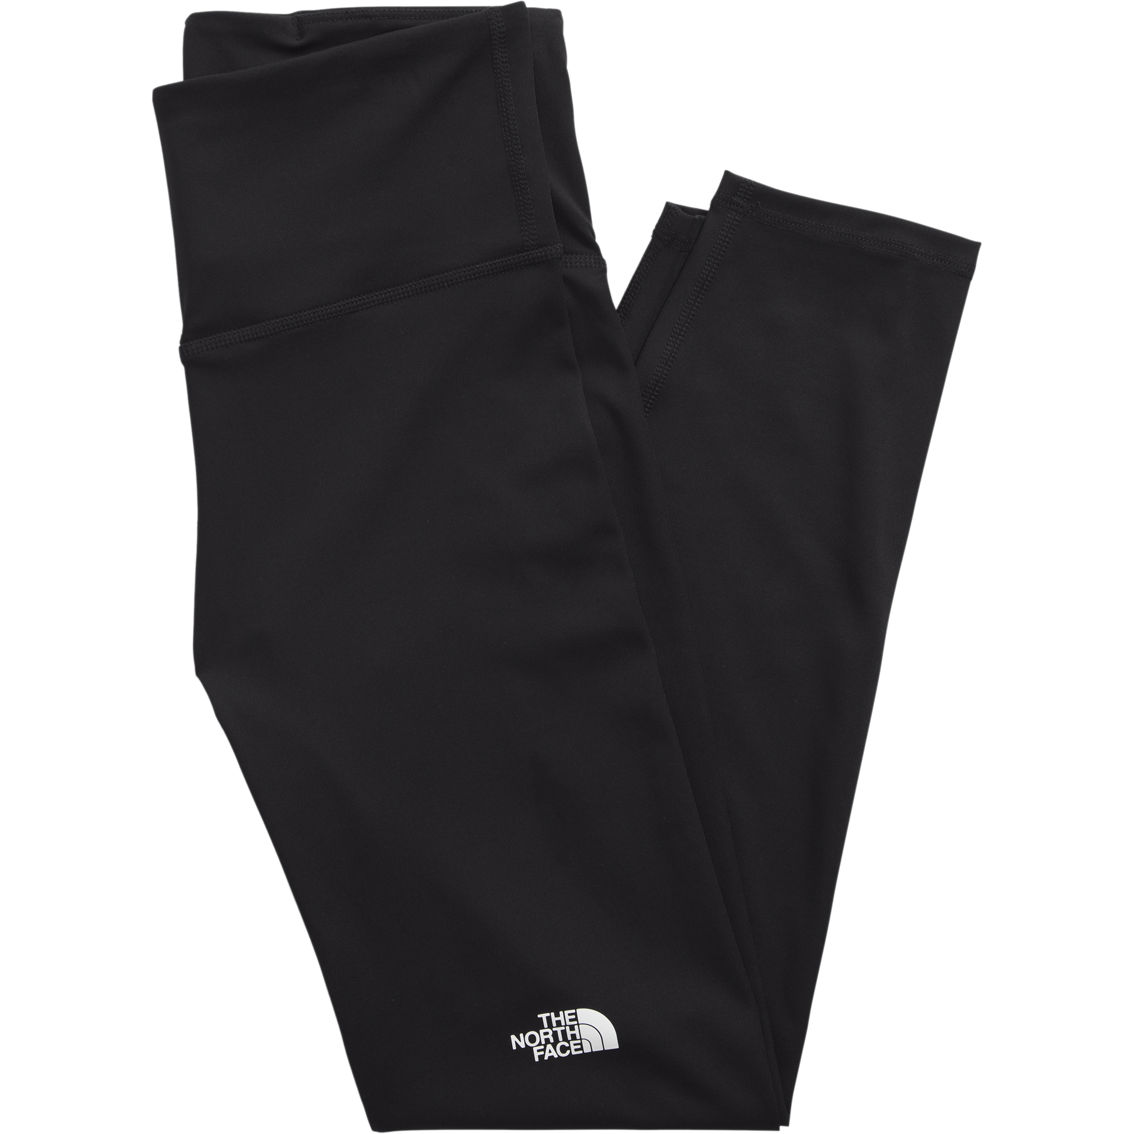 The North Face Elevation Flex 25 in. Leggings - Image 5 of 6